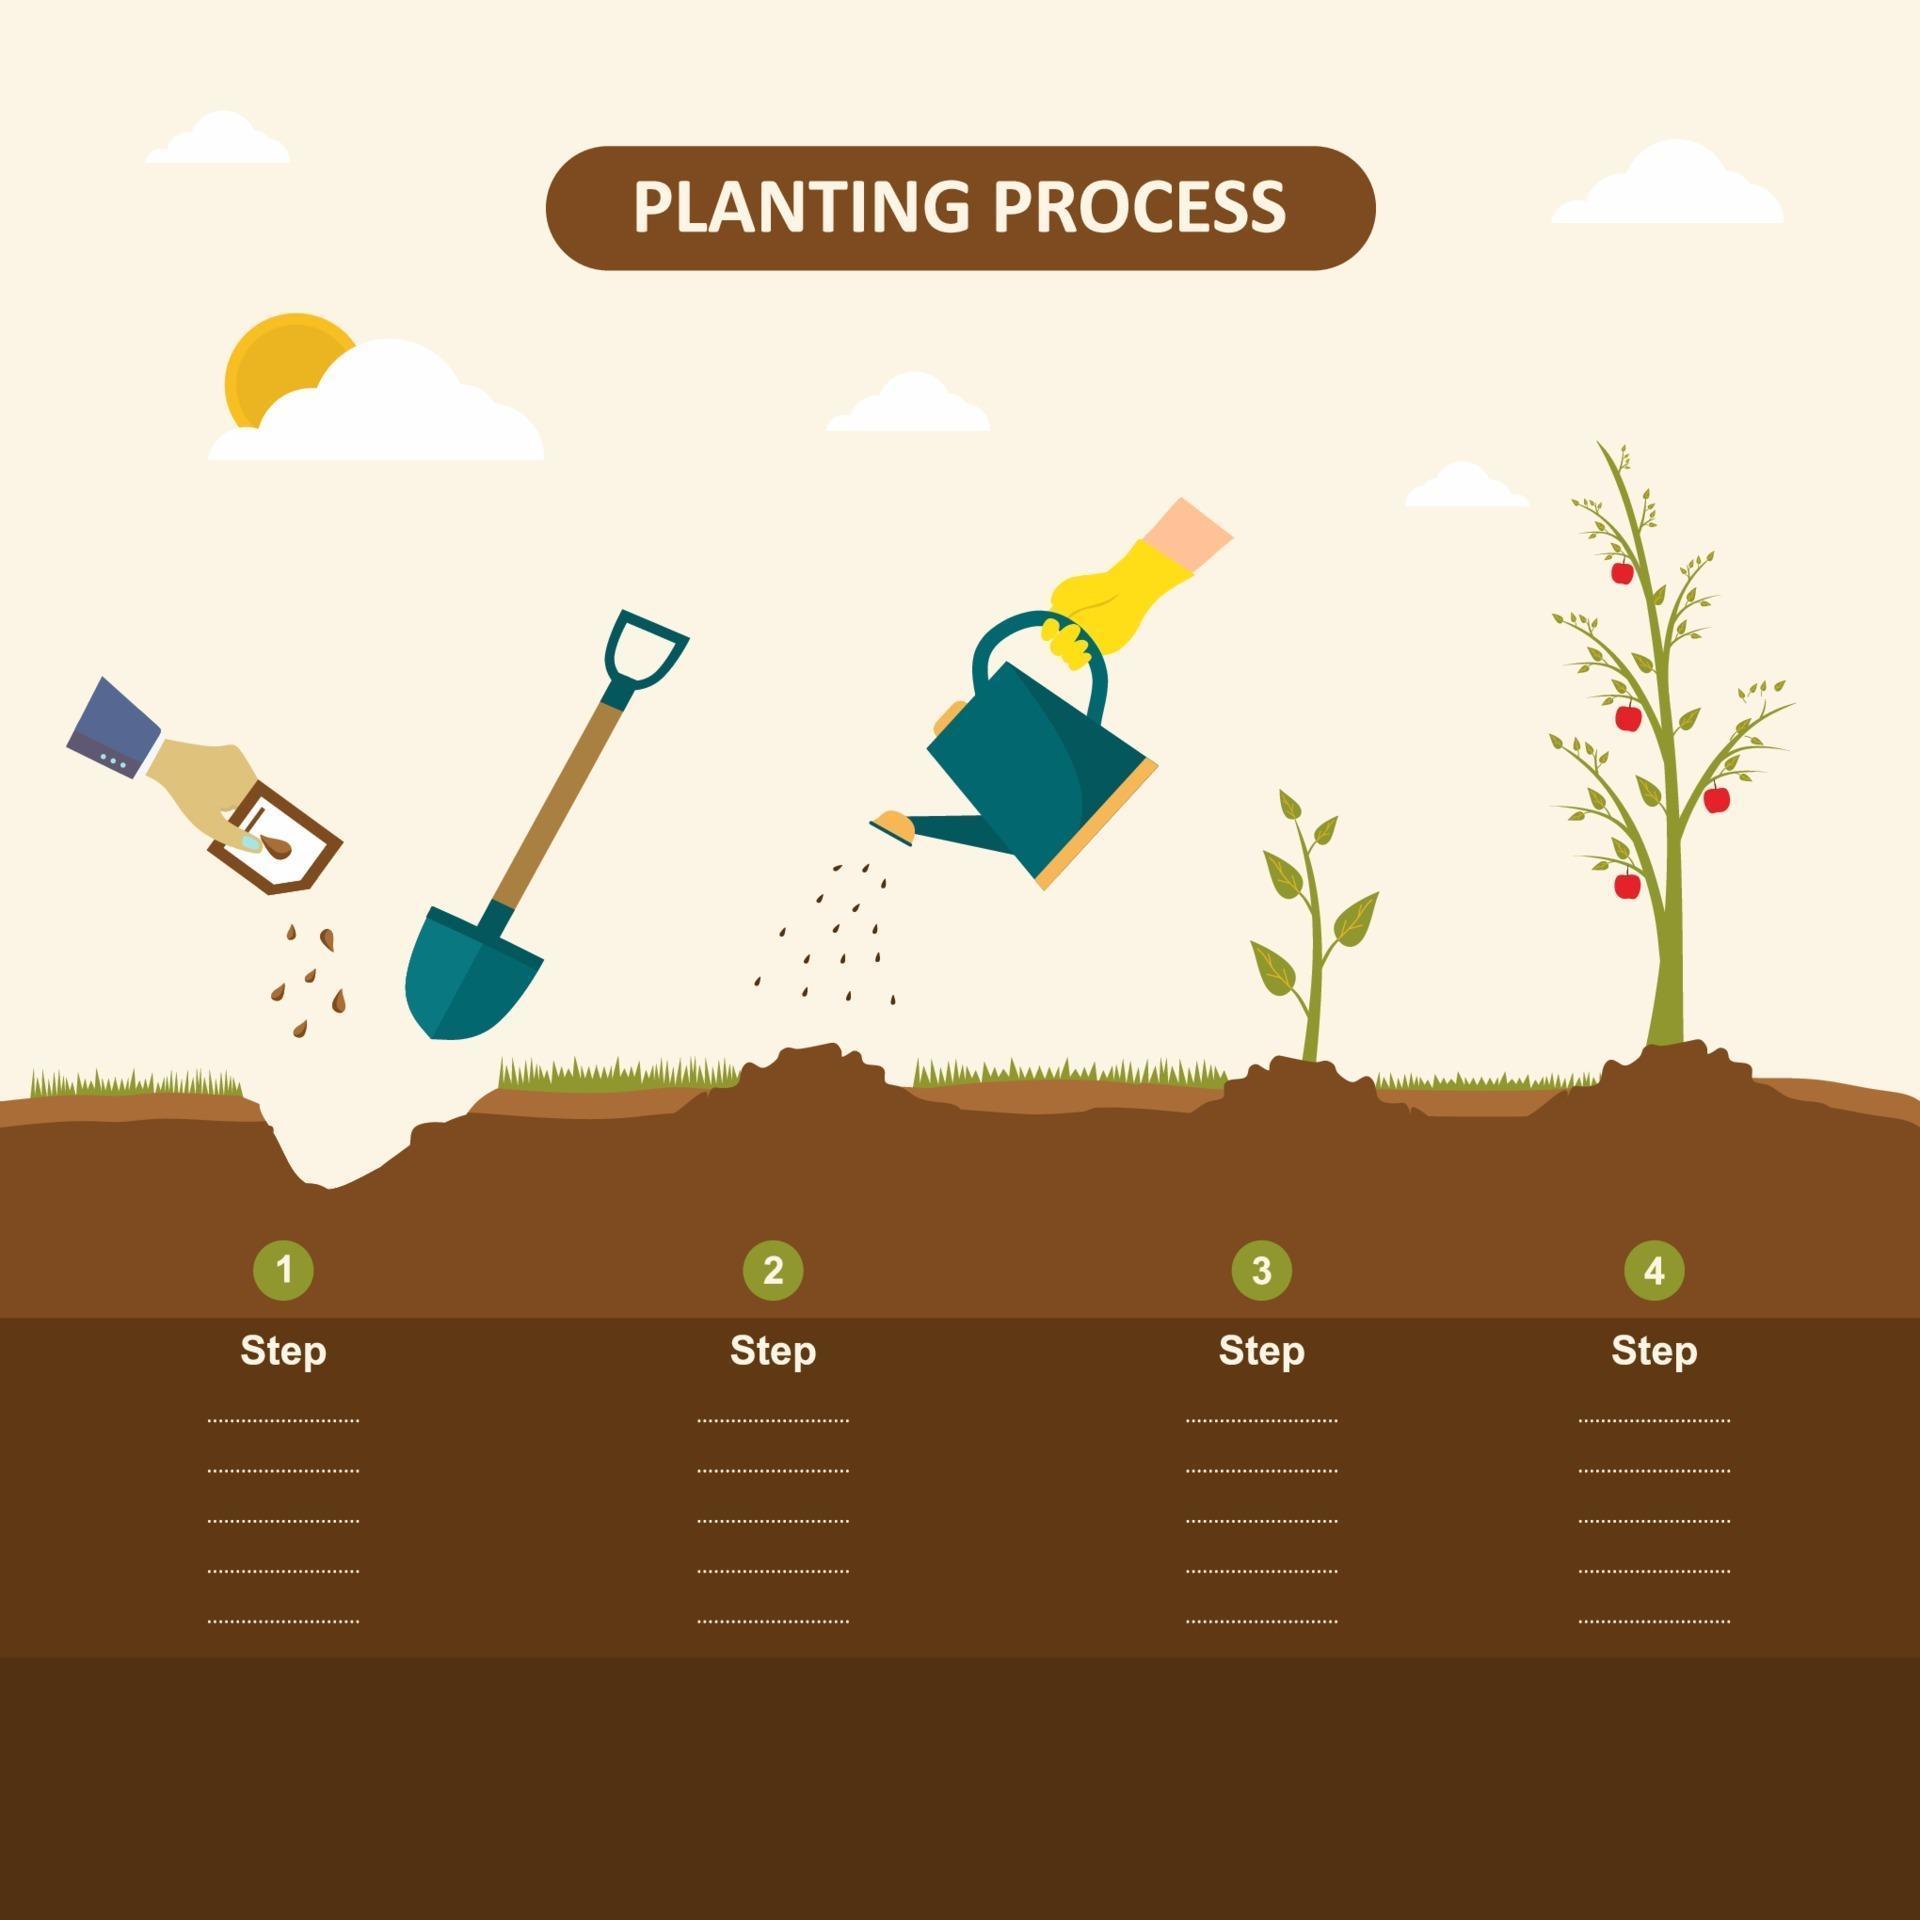 Planting Seed Sprout In Ground How To Grow Tree From The Seed In The